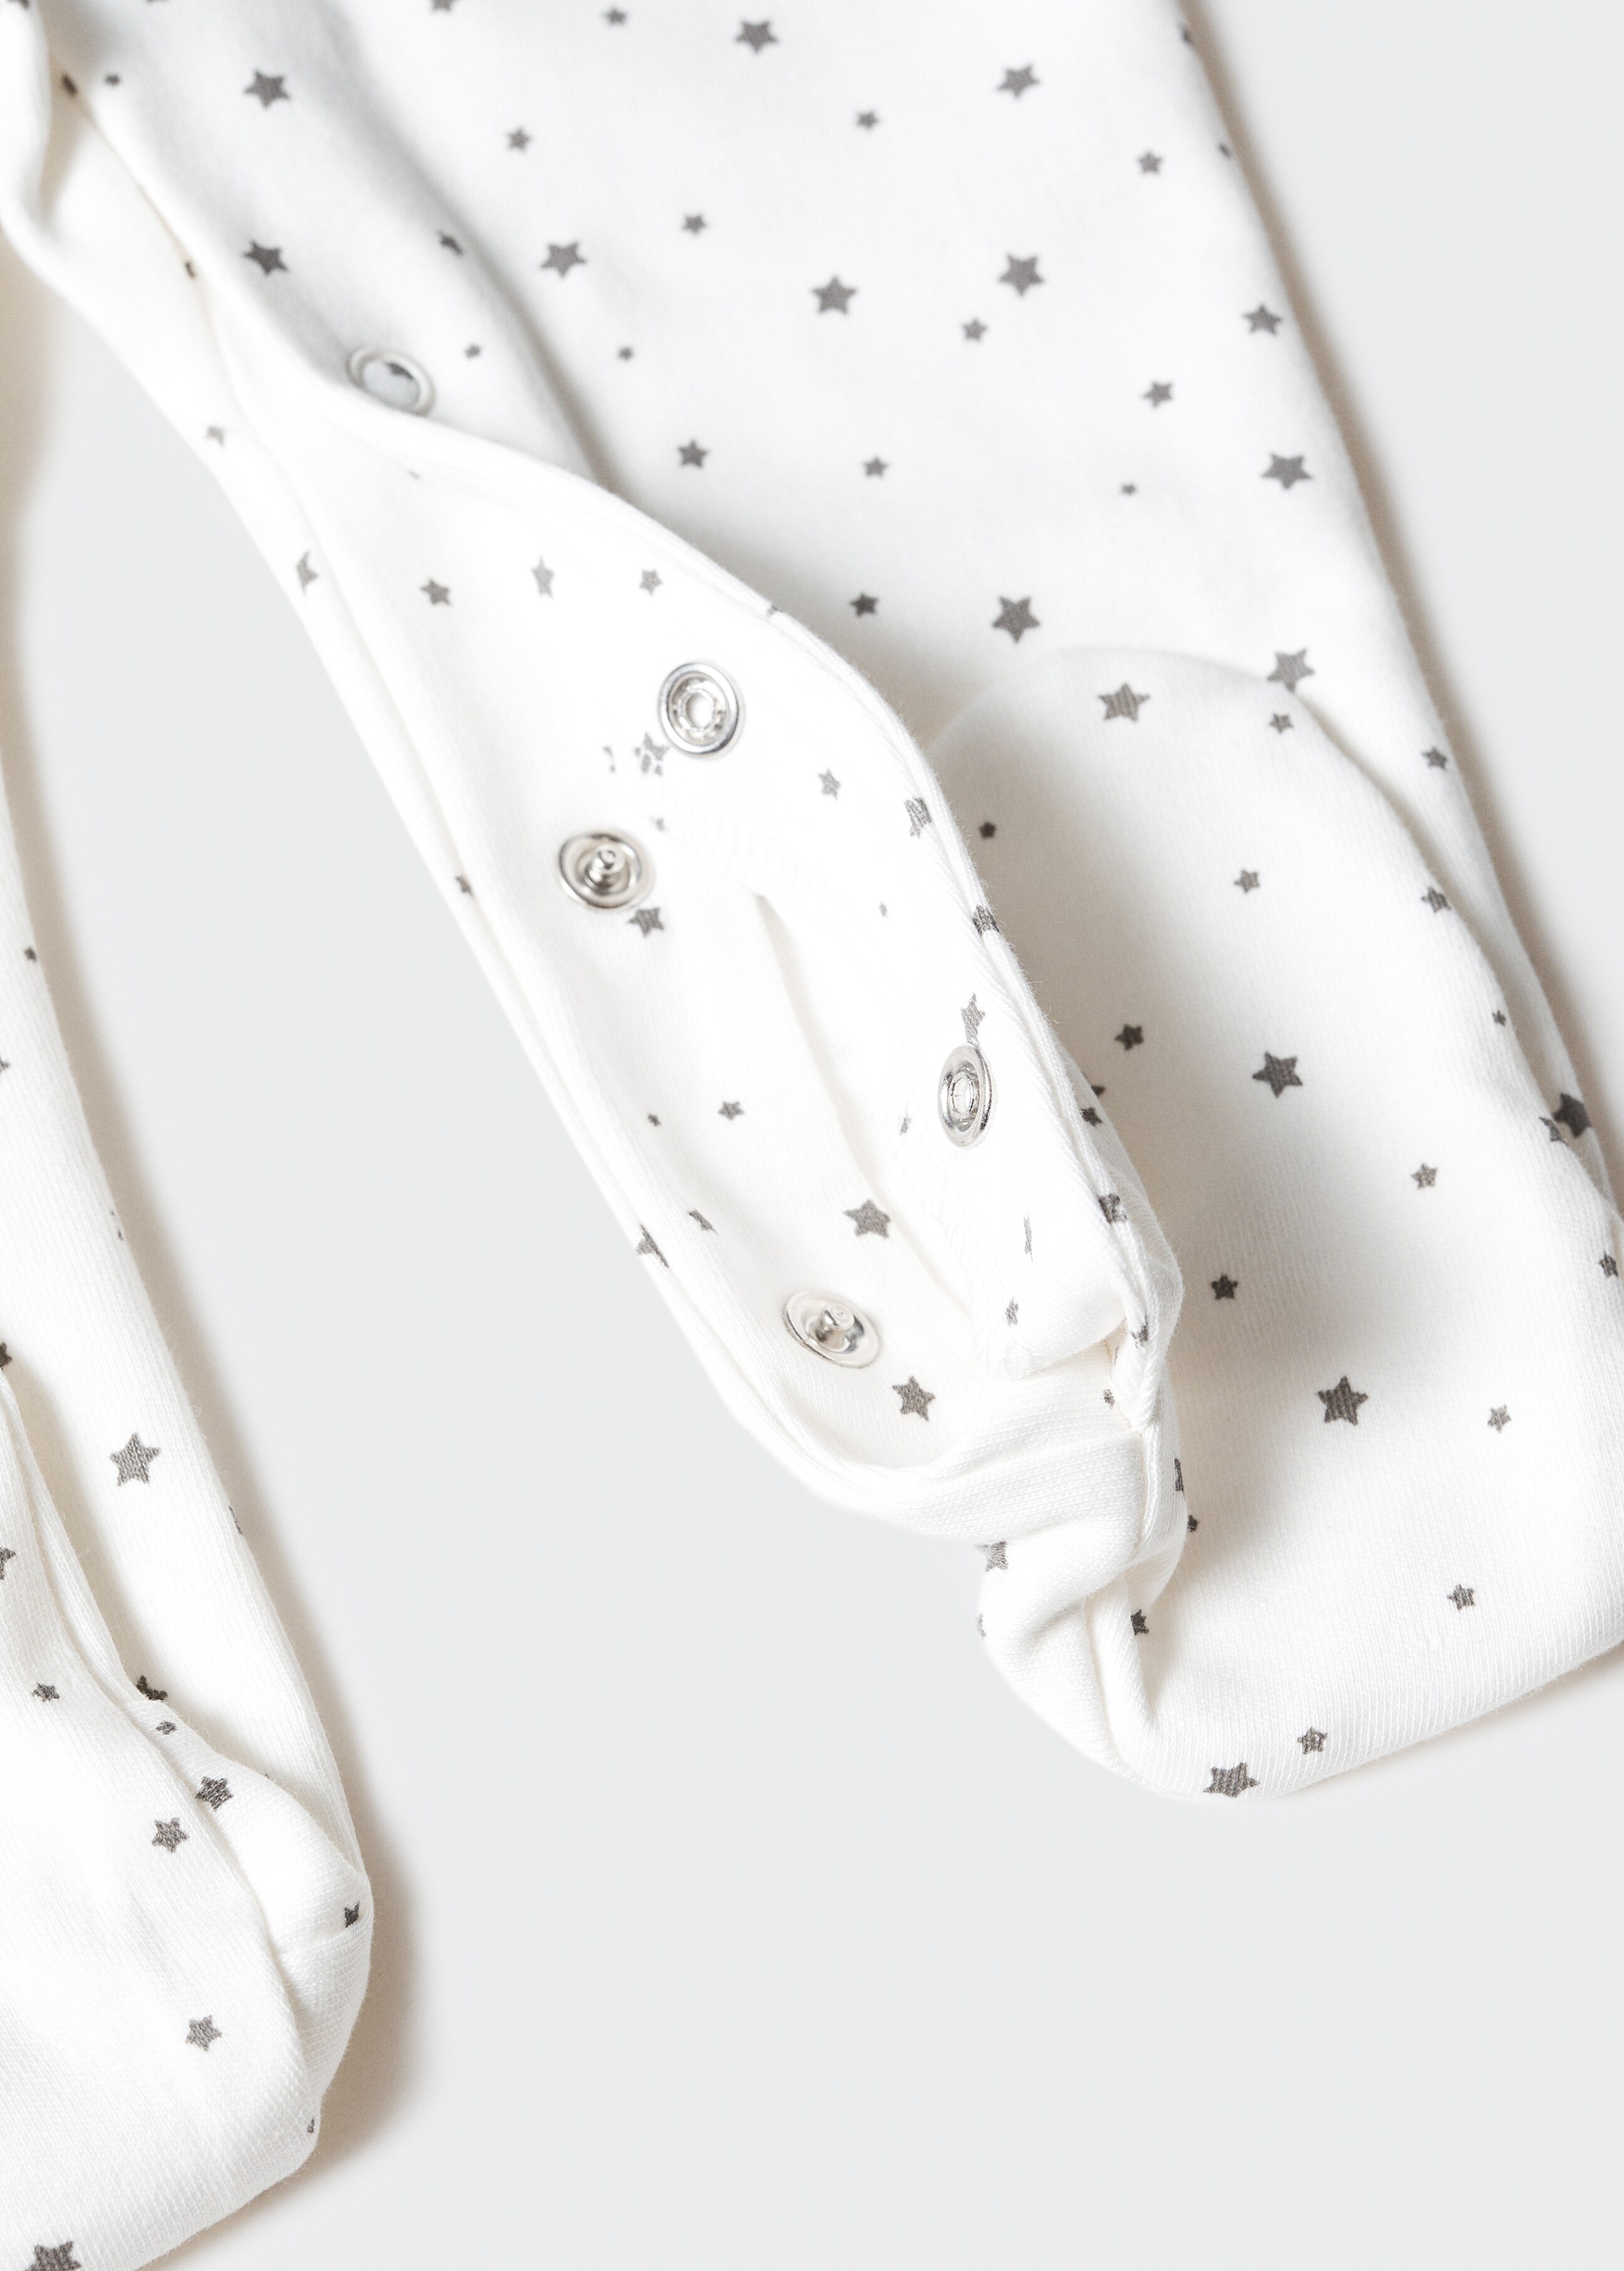 Star body pyjamas - Details of the article 8